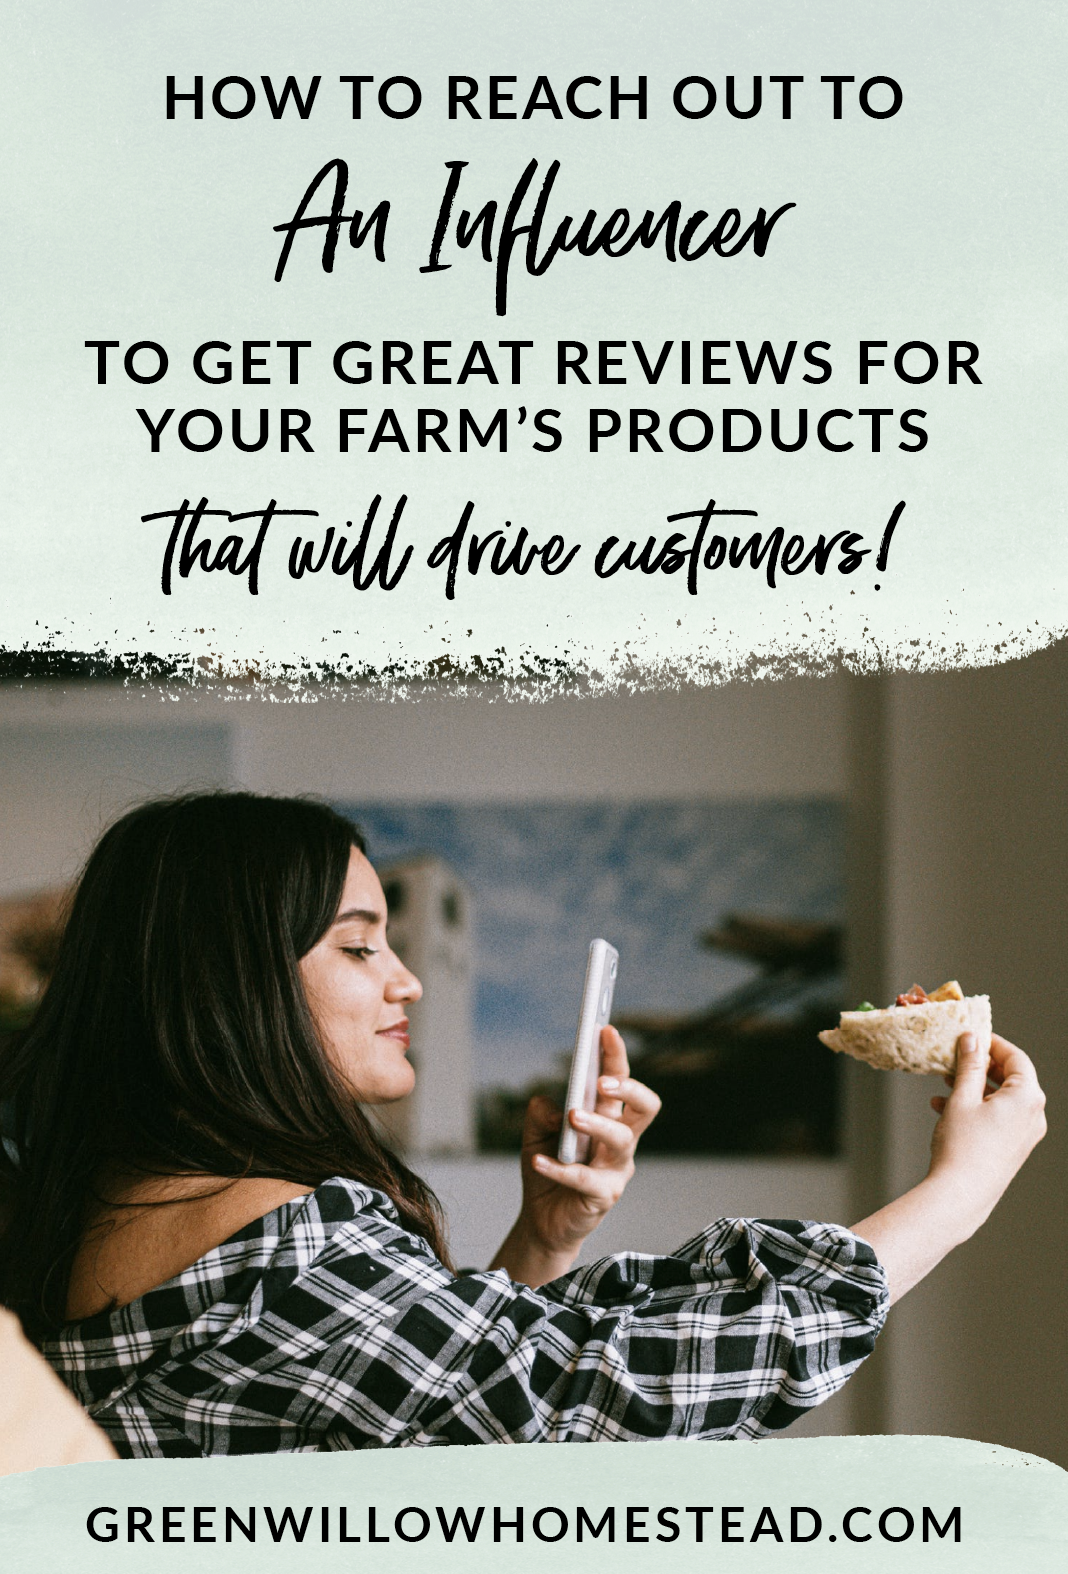 How To Reach Out To An Influencer To Get Great Reviews For Your Farm's Products That Will Drive Customers